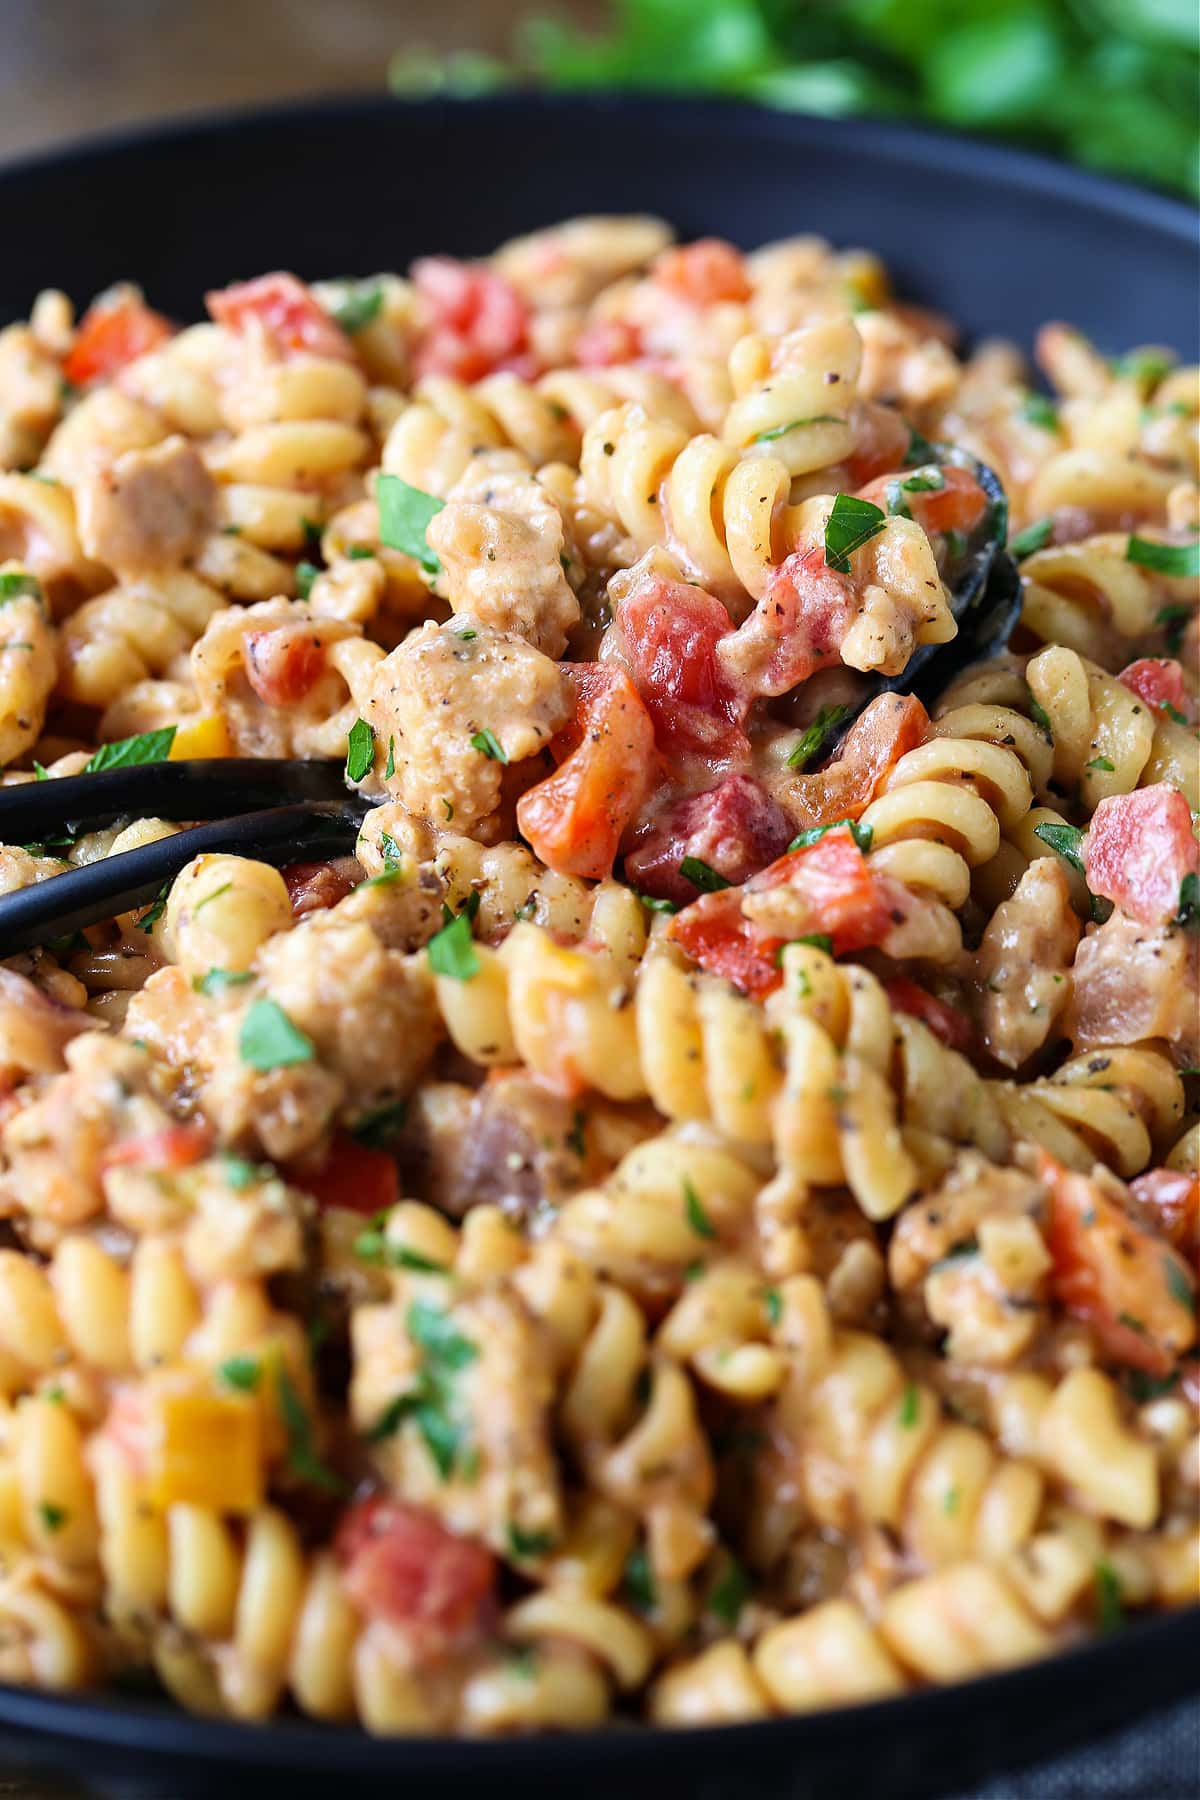 rotini pasta with ground turkey, vegetables and cheese